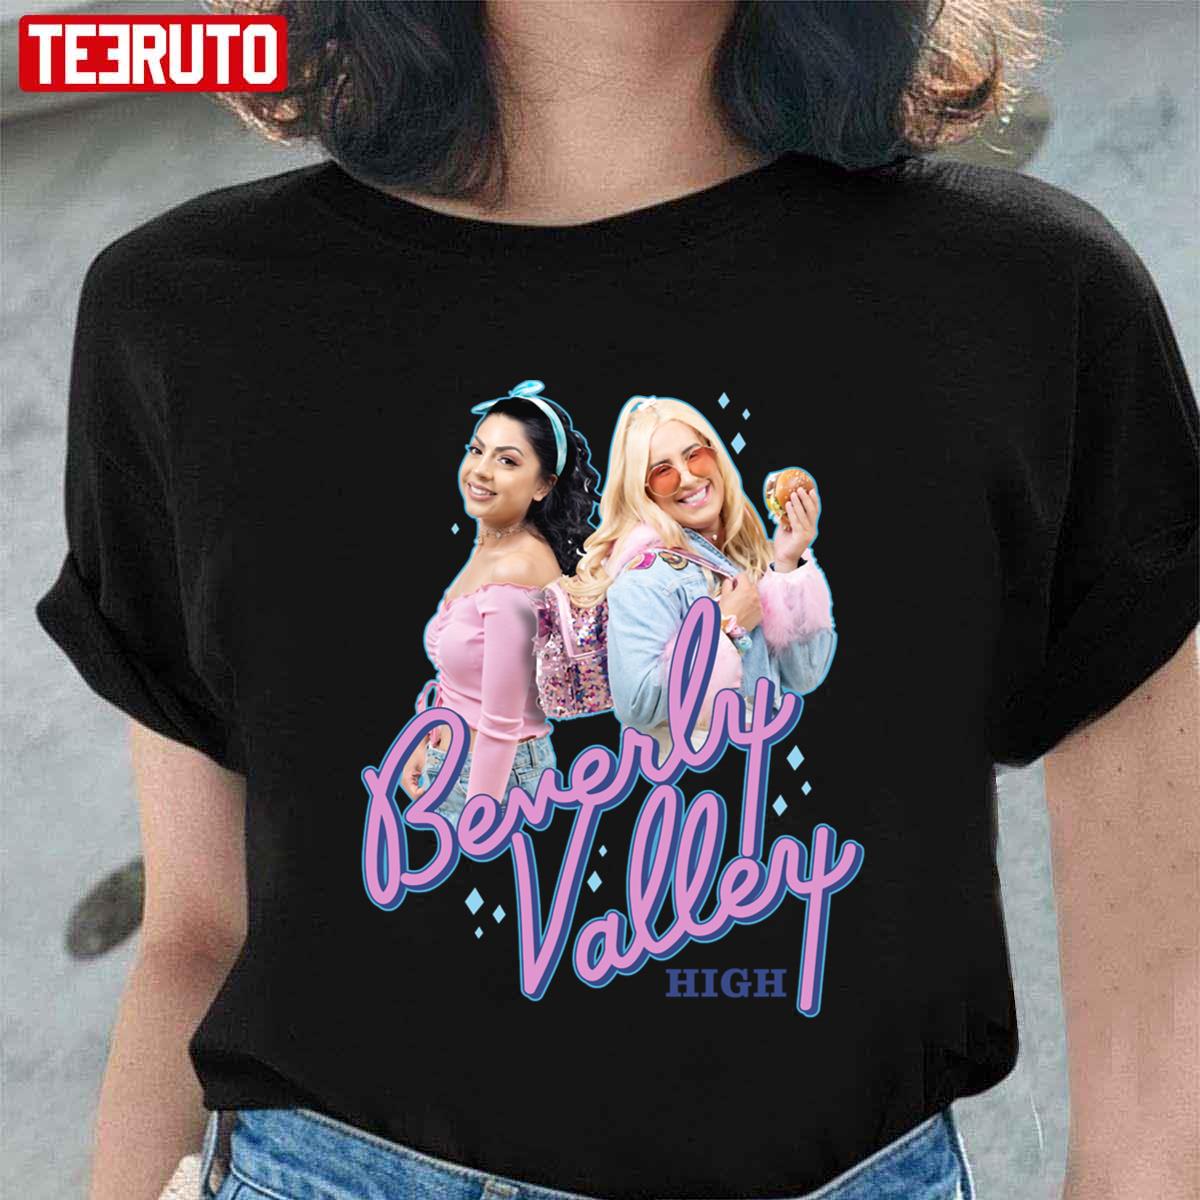 Beverly Valley High Characters Retro Unisex T-Shirt